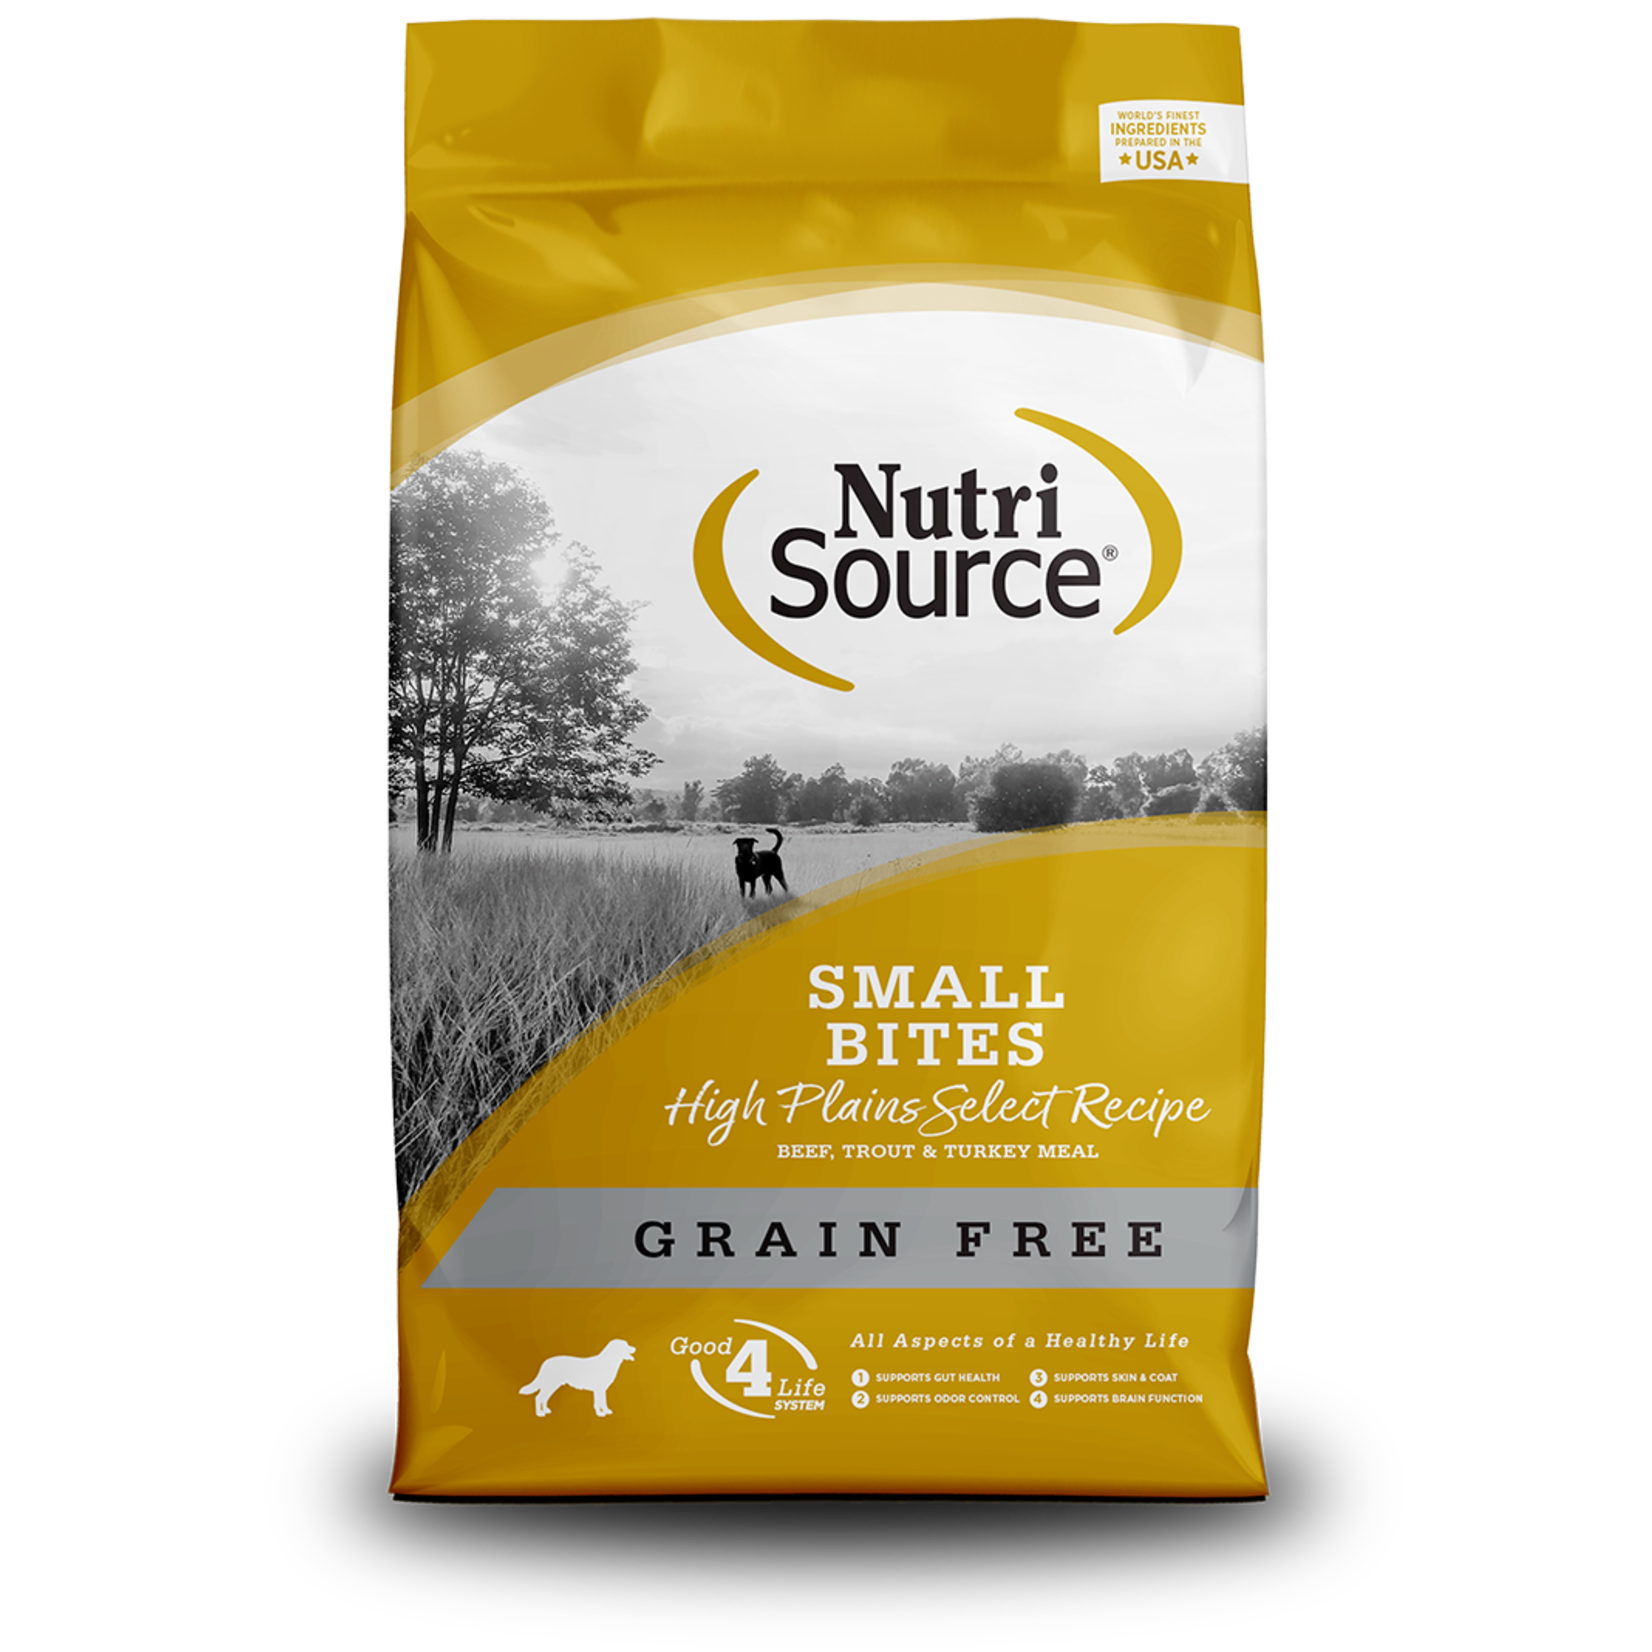 NutriSource NutriSource Grain Free Small Bites High Plains Select Recipe for Dogs